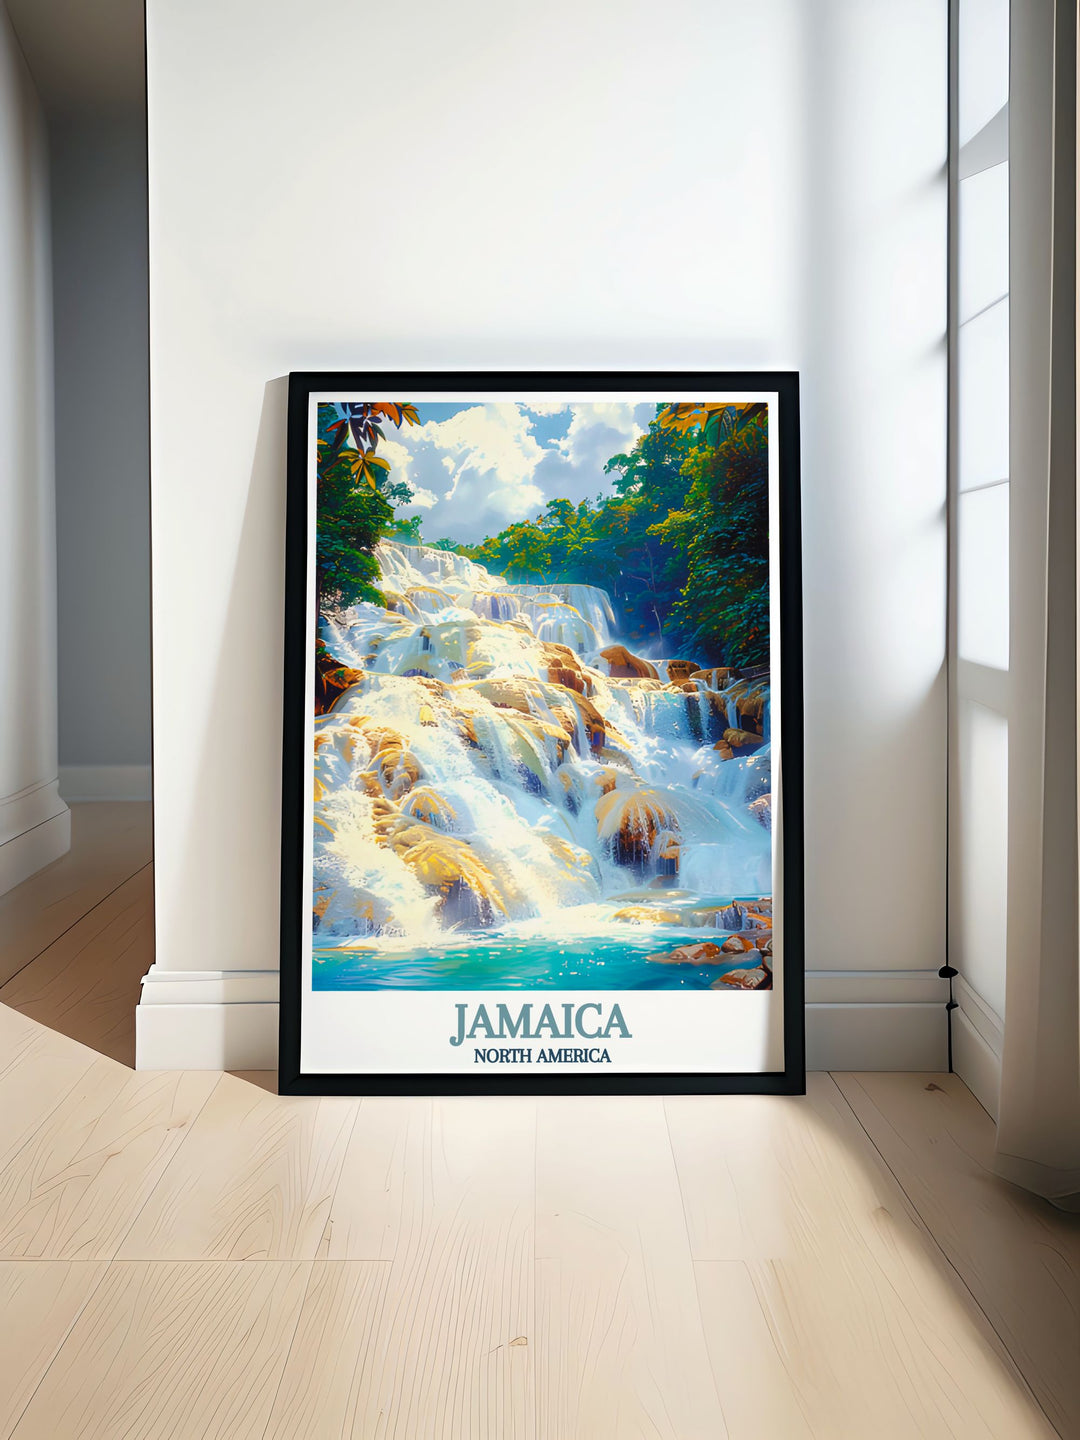 This print features the breathtaking Dunns River Falls, bringing the serene and refreshing ambiance of Jamaica into your home decor.